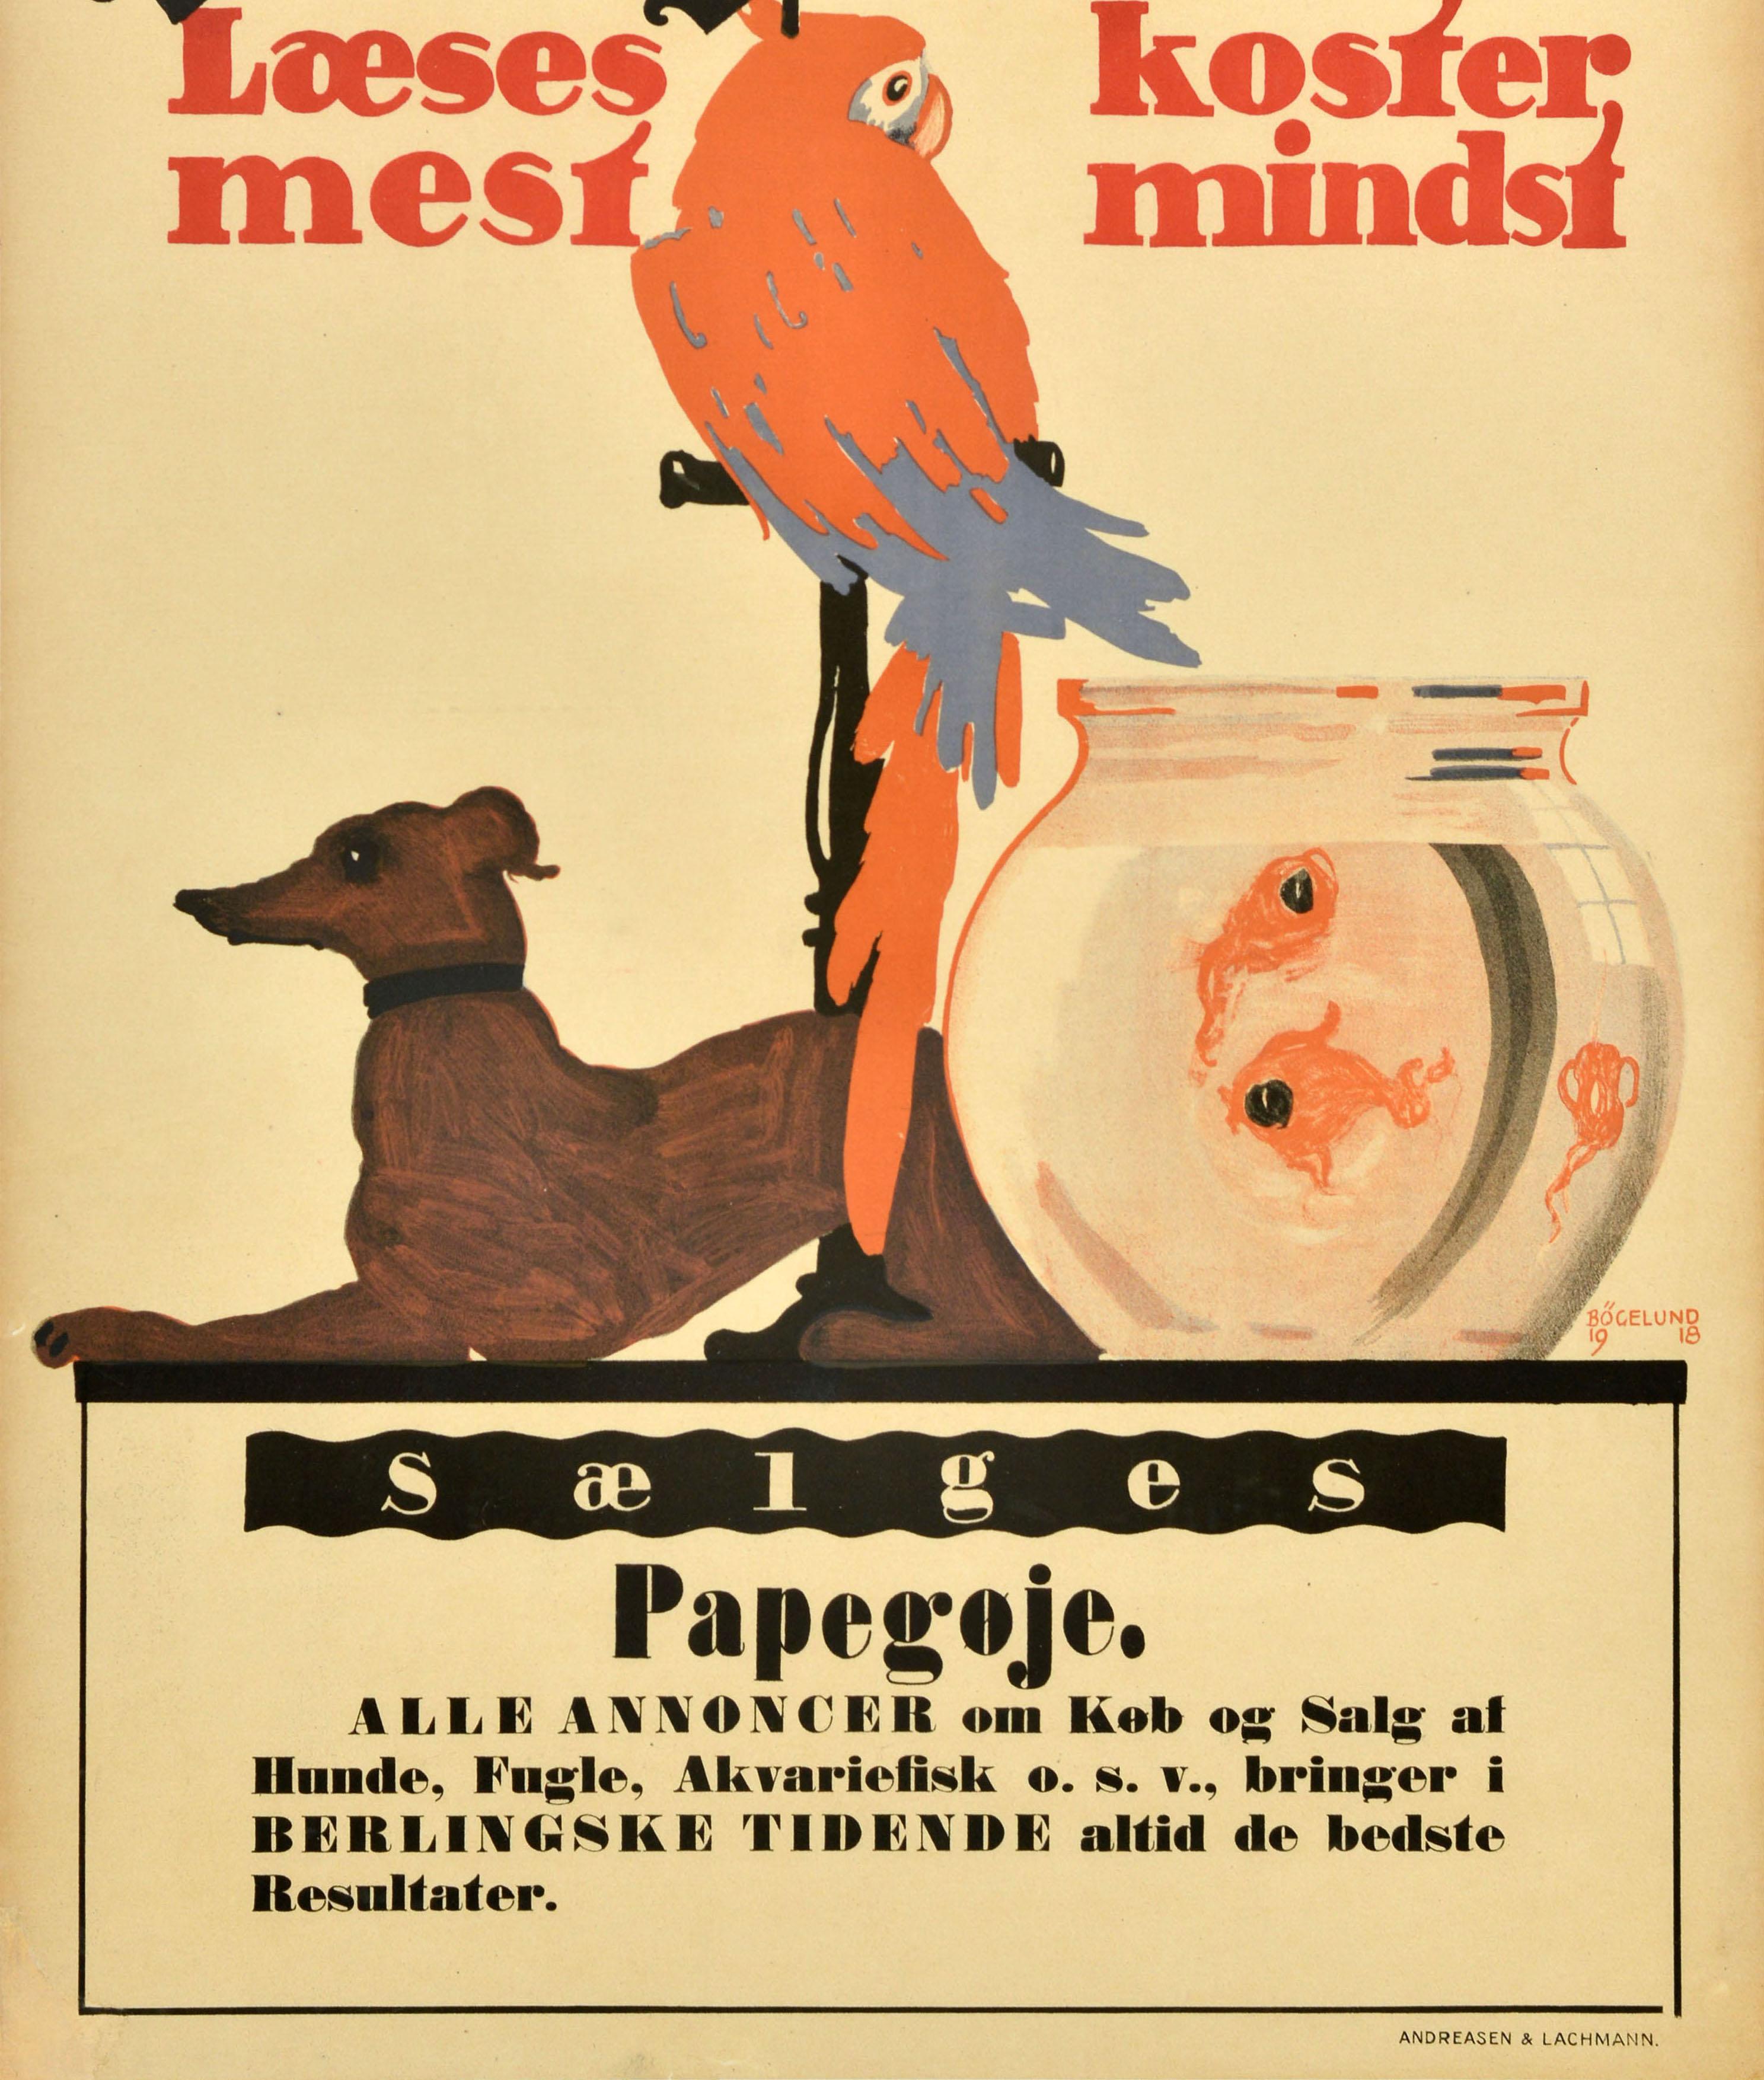 Original antique advertising poster for advertisements in the Berlingske Tidende / Berling Newspaper (founded 1749) featuring great artwork of a parrot on a bird perch above a dog with fish in a bowl in the foreground, the text in Danish in red and